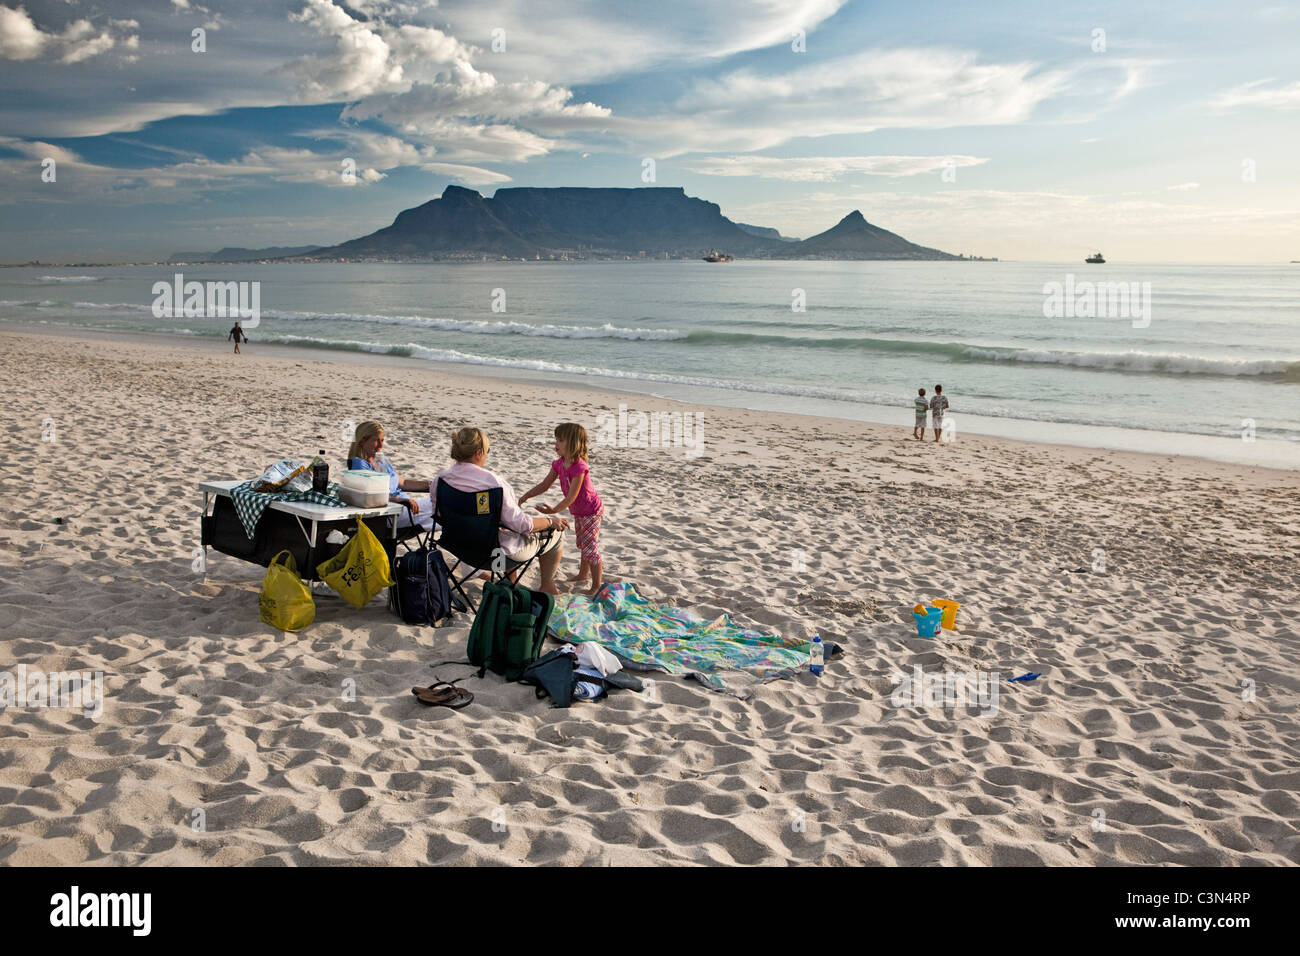 South Africa, Cape Town, Blouberg beach. Family on the beach. Background: Table mountain. Stock Photo